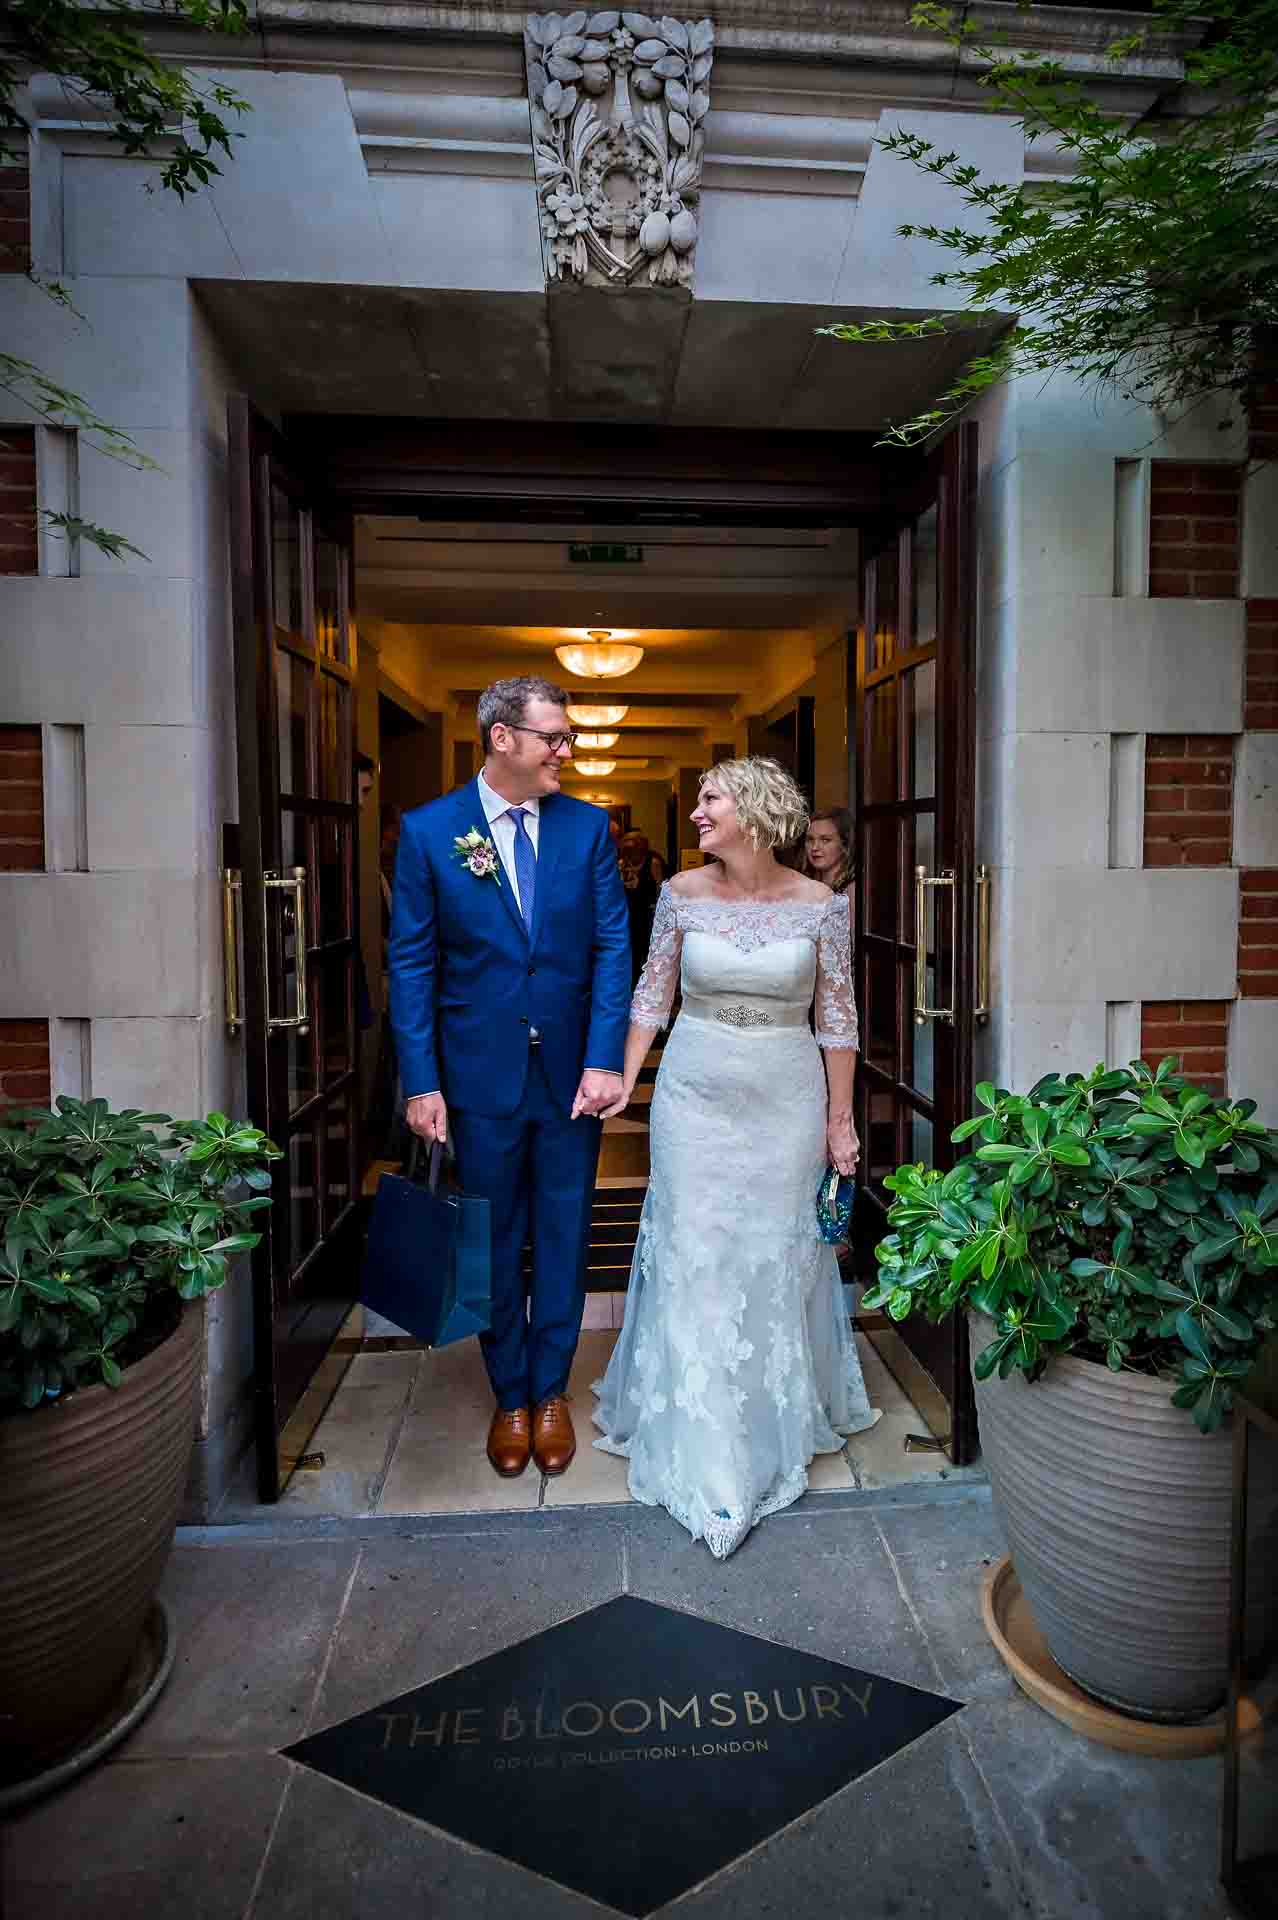 Wedding couple looking at each other at entrance door of Bloomsbury Hotel